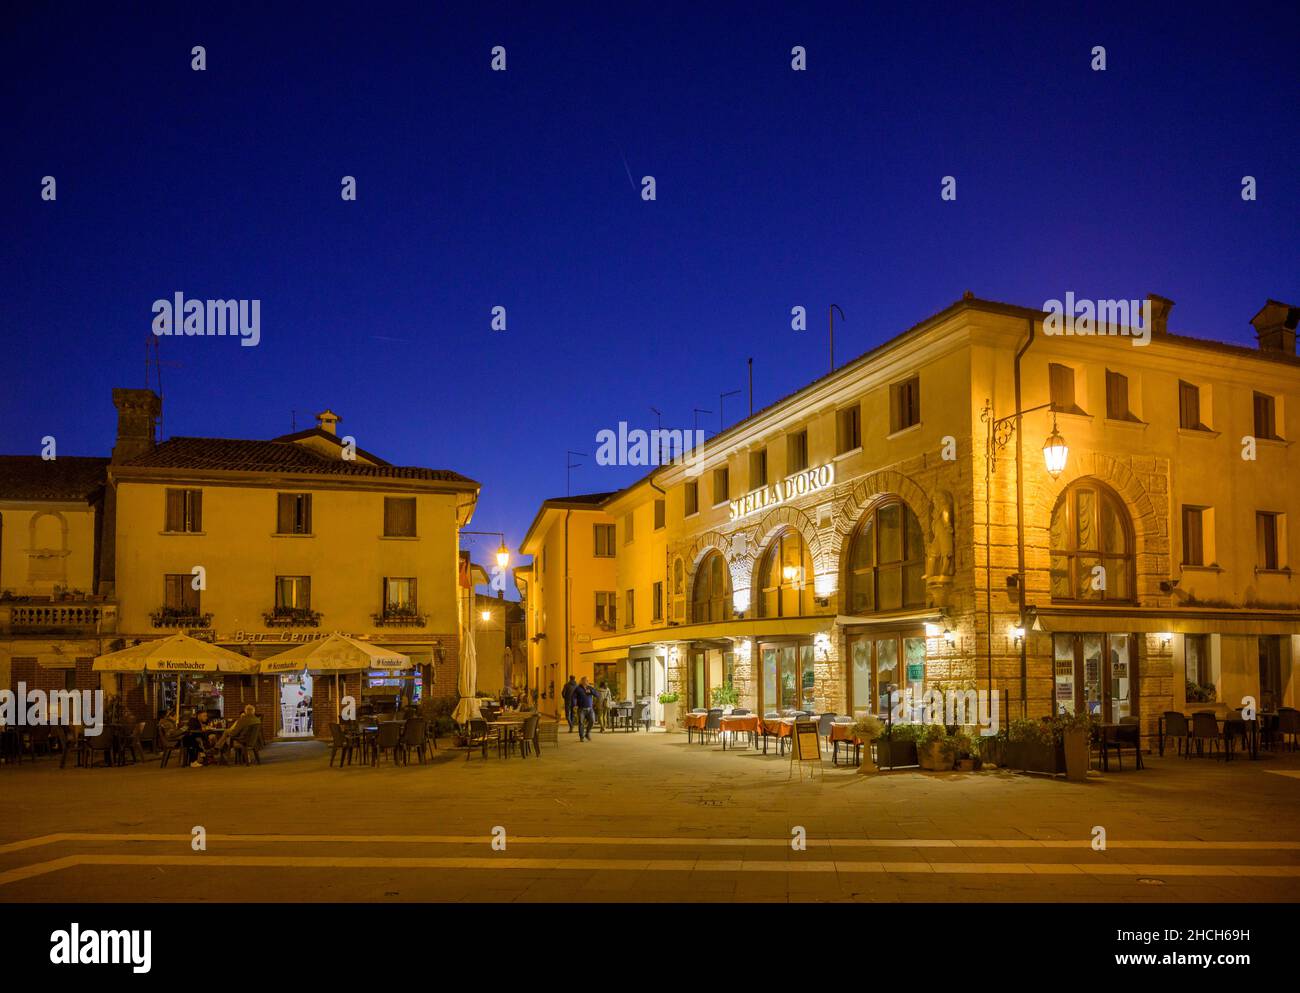 Evening shot from the square at Torre Millenaria, Marano Lagunare, province of Udine, Italy Stock Photo